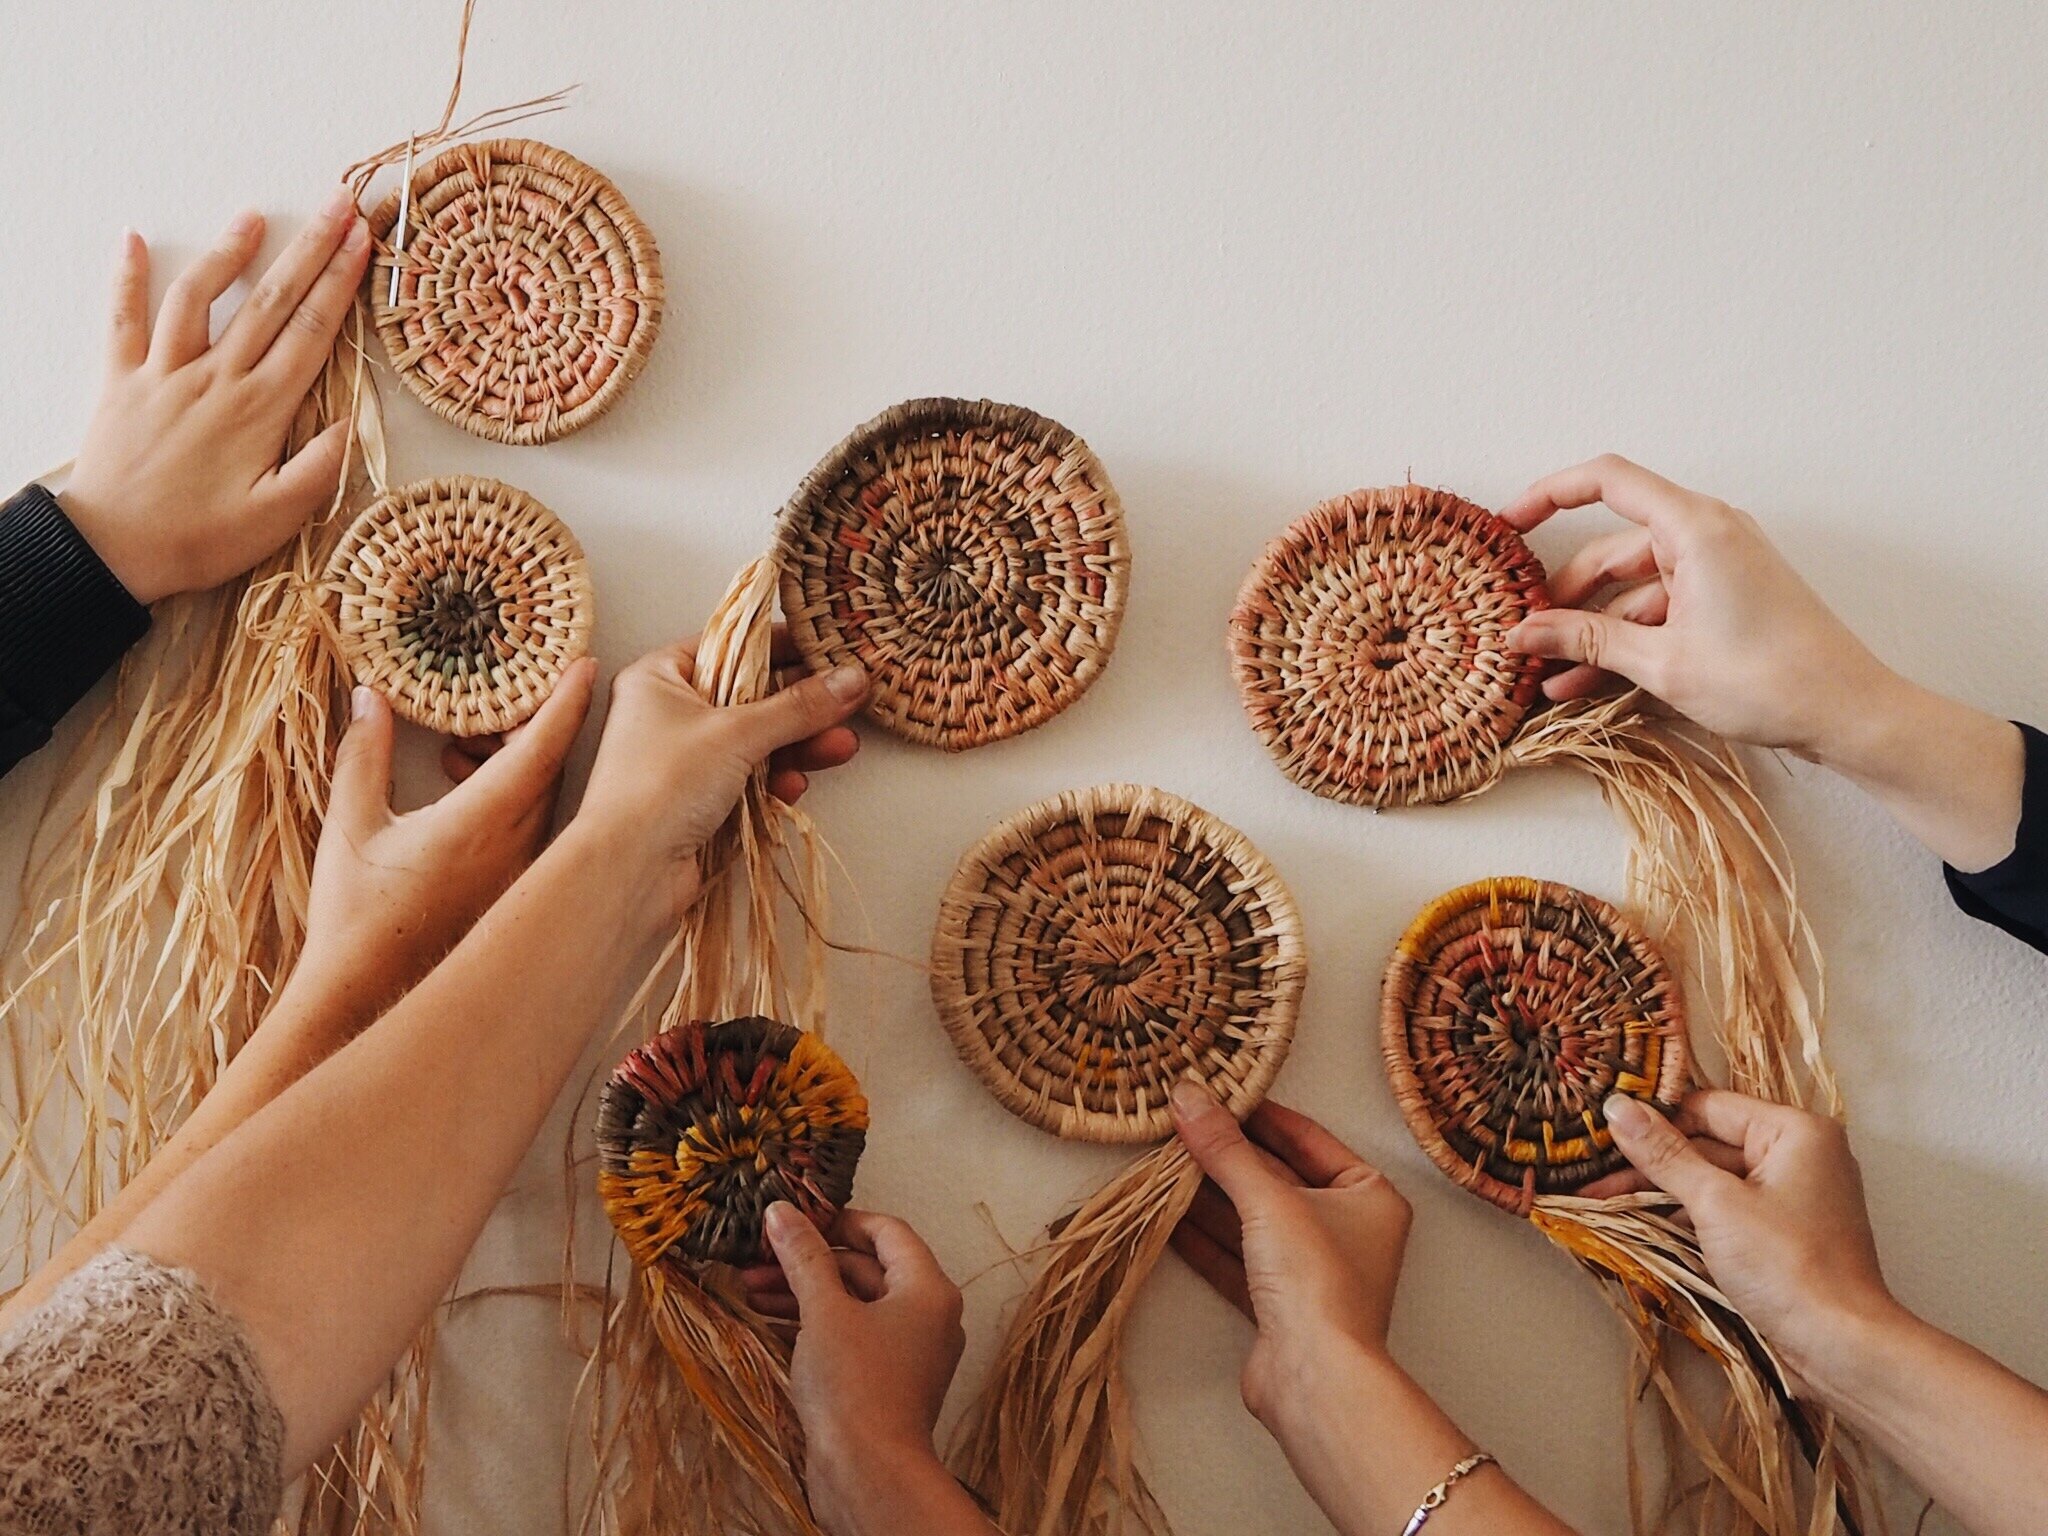 How to weave a basket using raffia or fabric - make your own! — petalplum